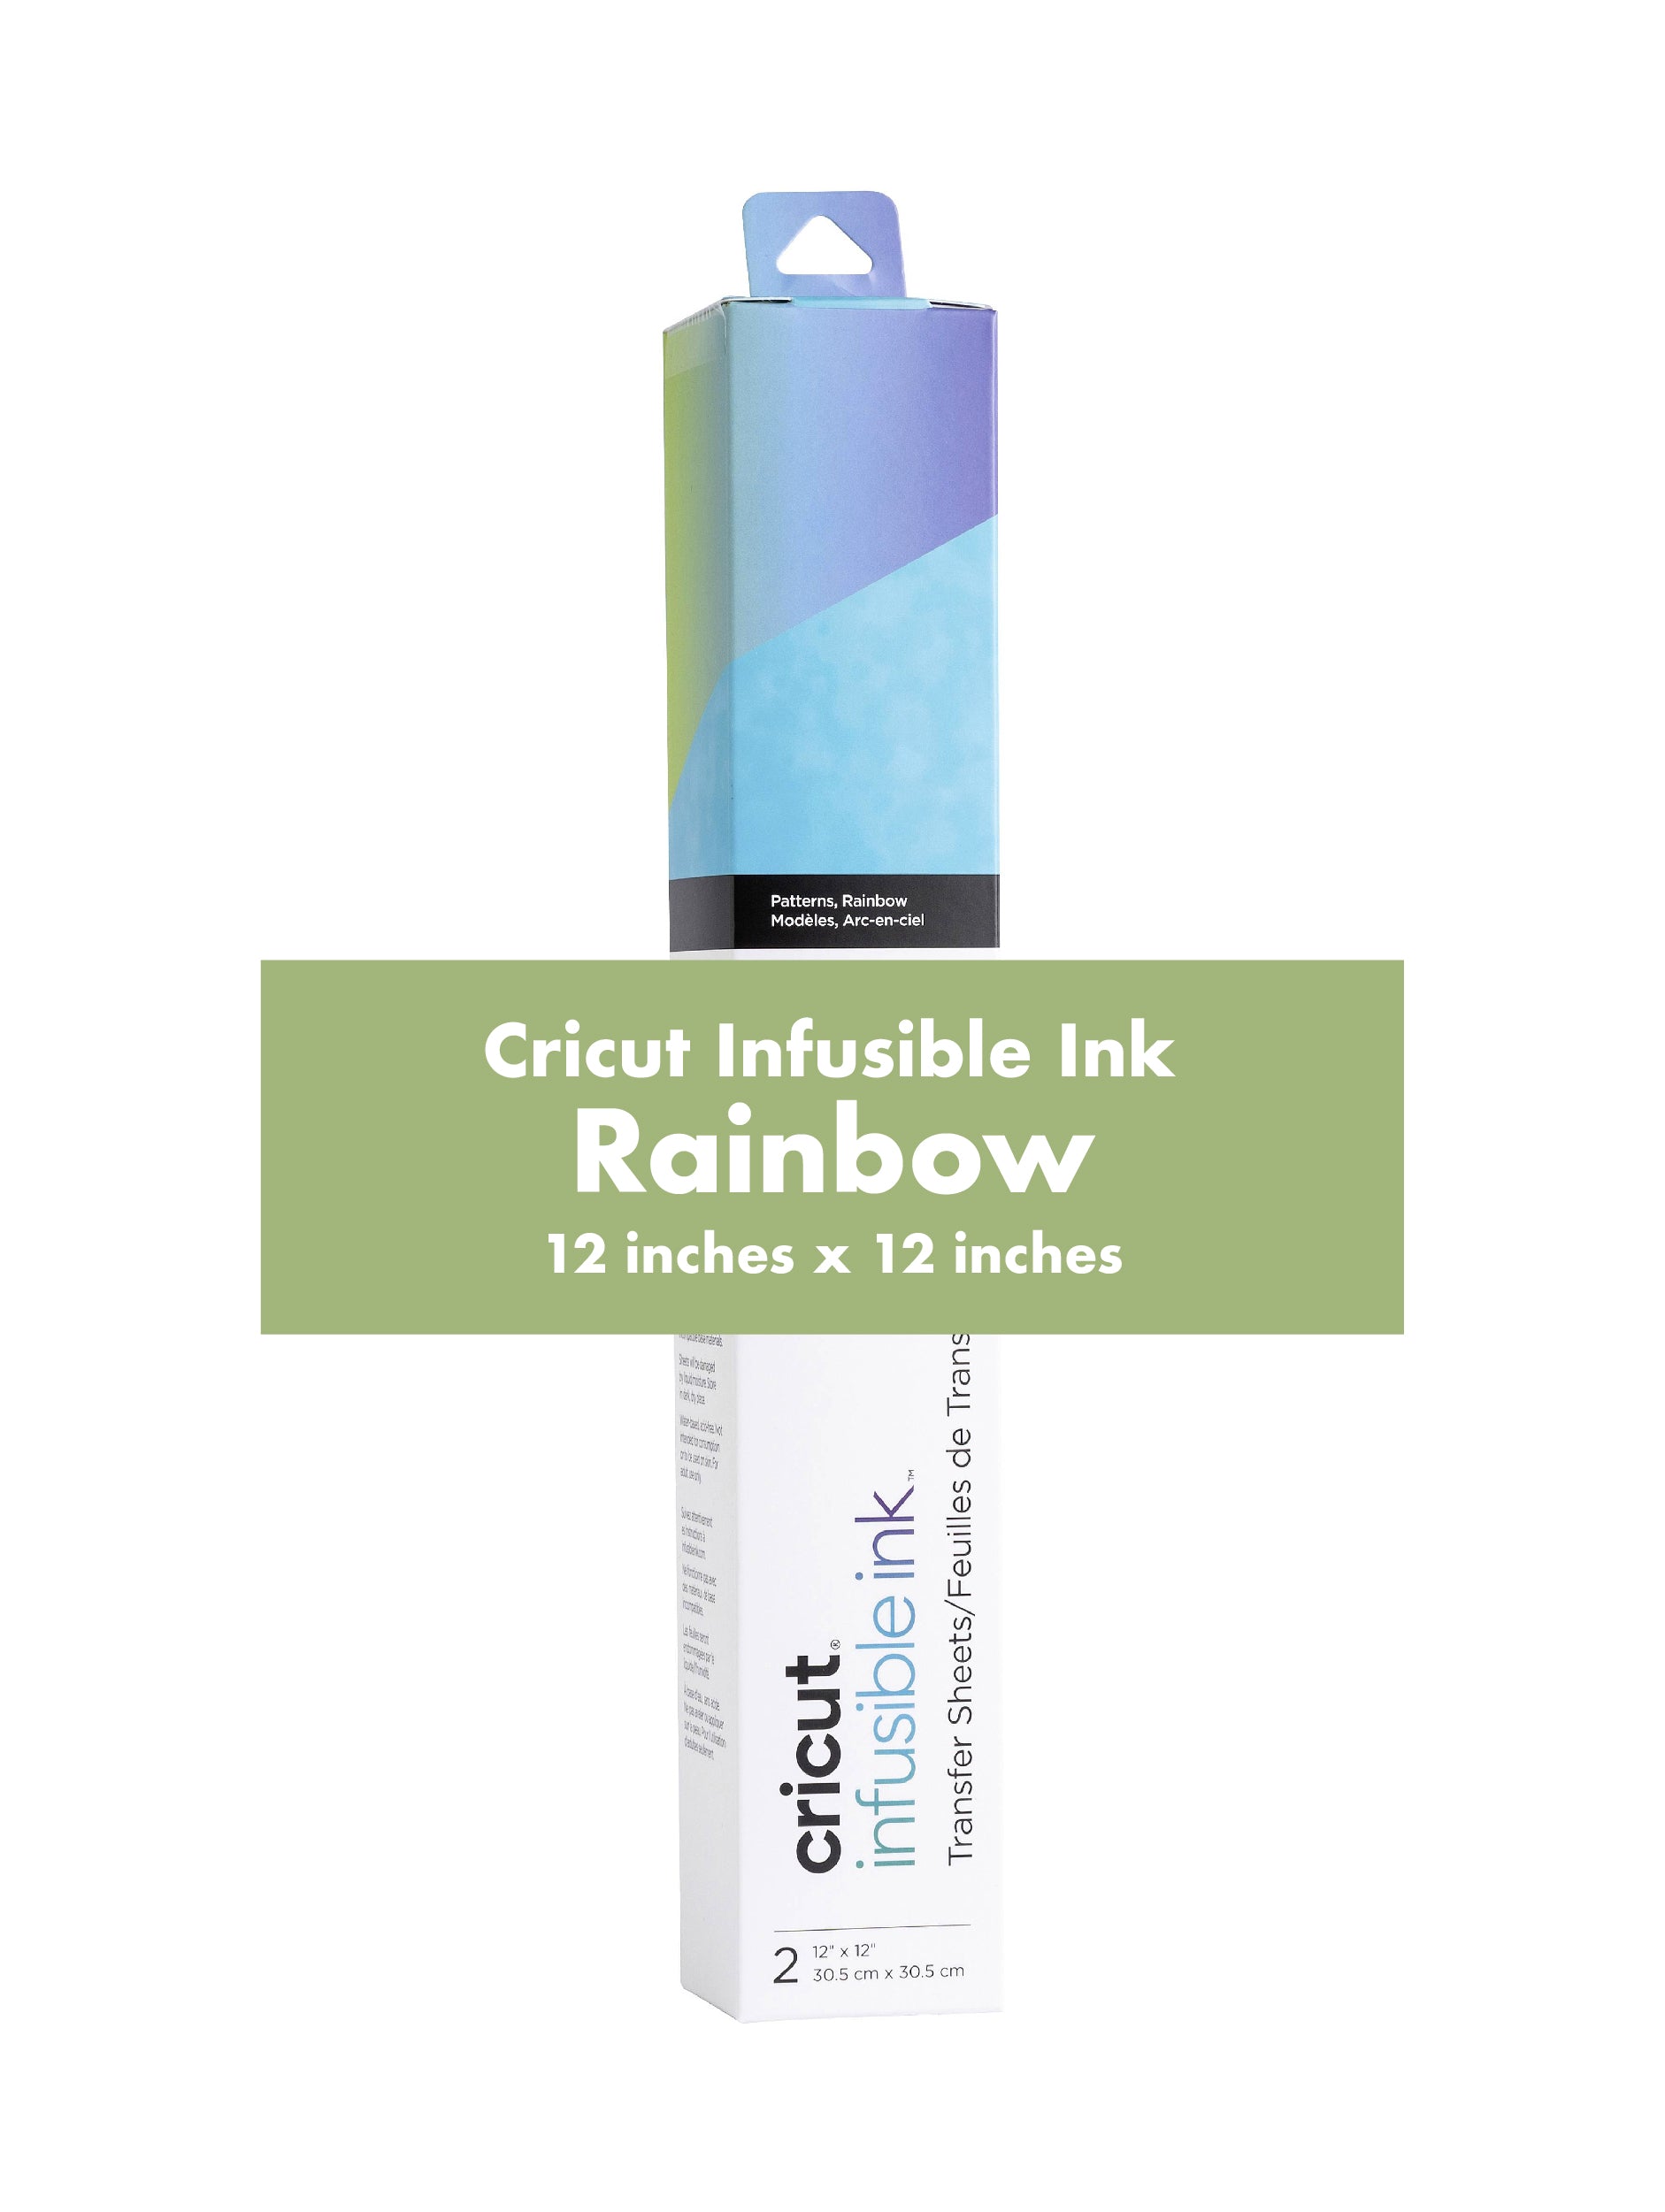 Cricut Infusible Ink Transfer Sheet Patterns (12x12)